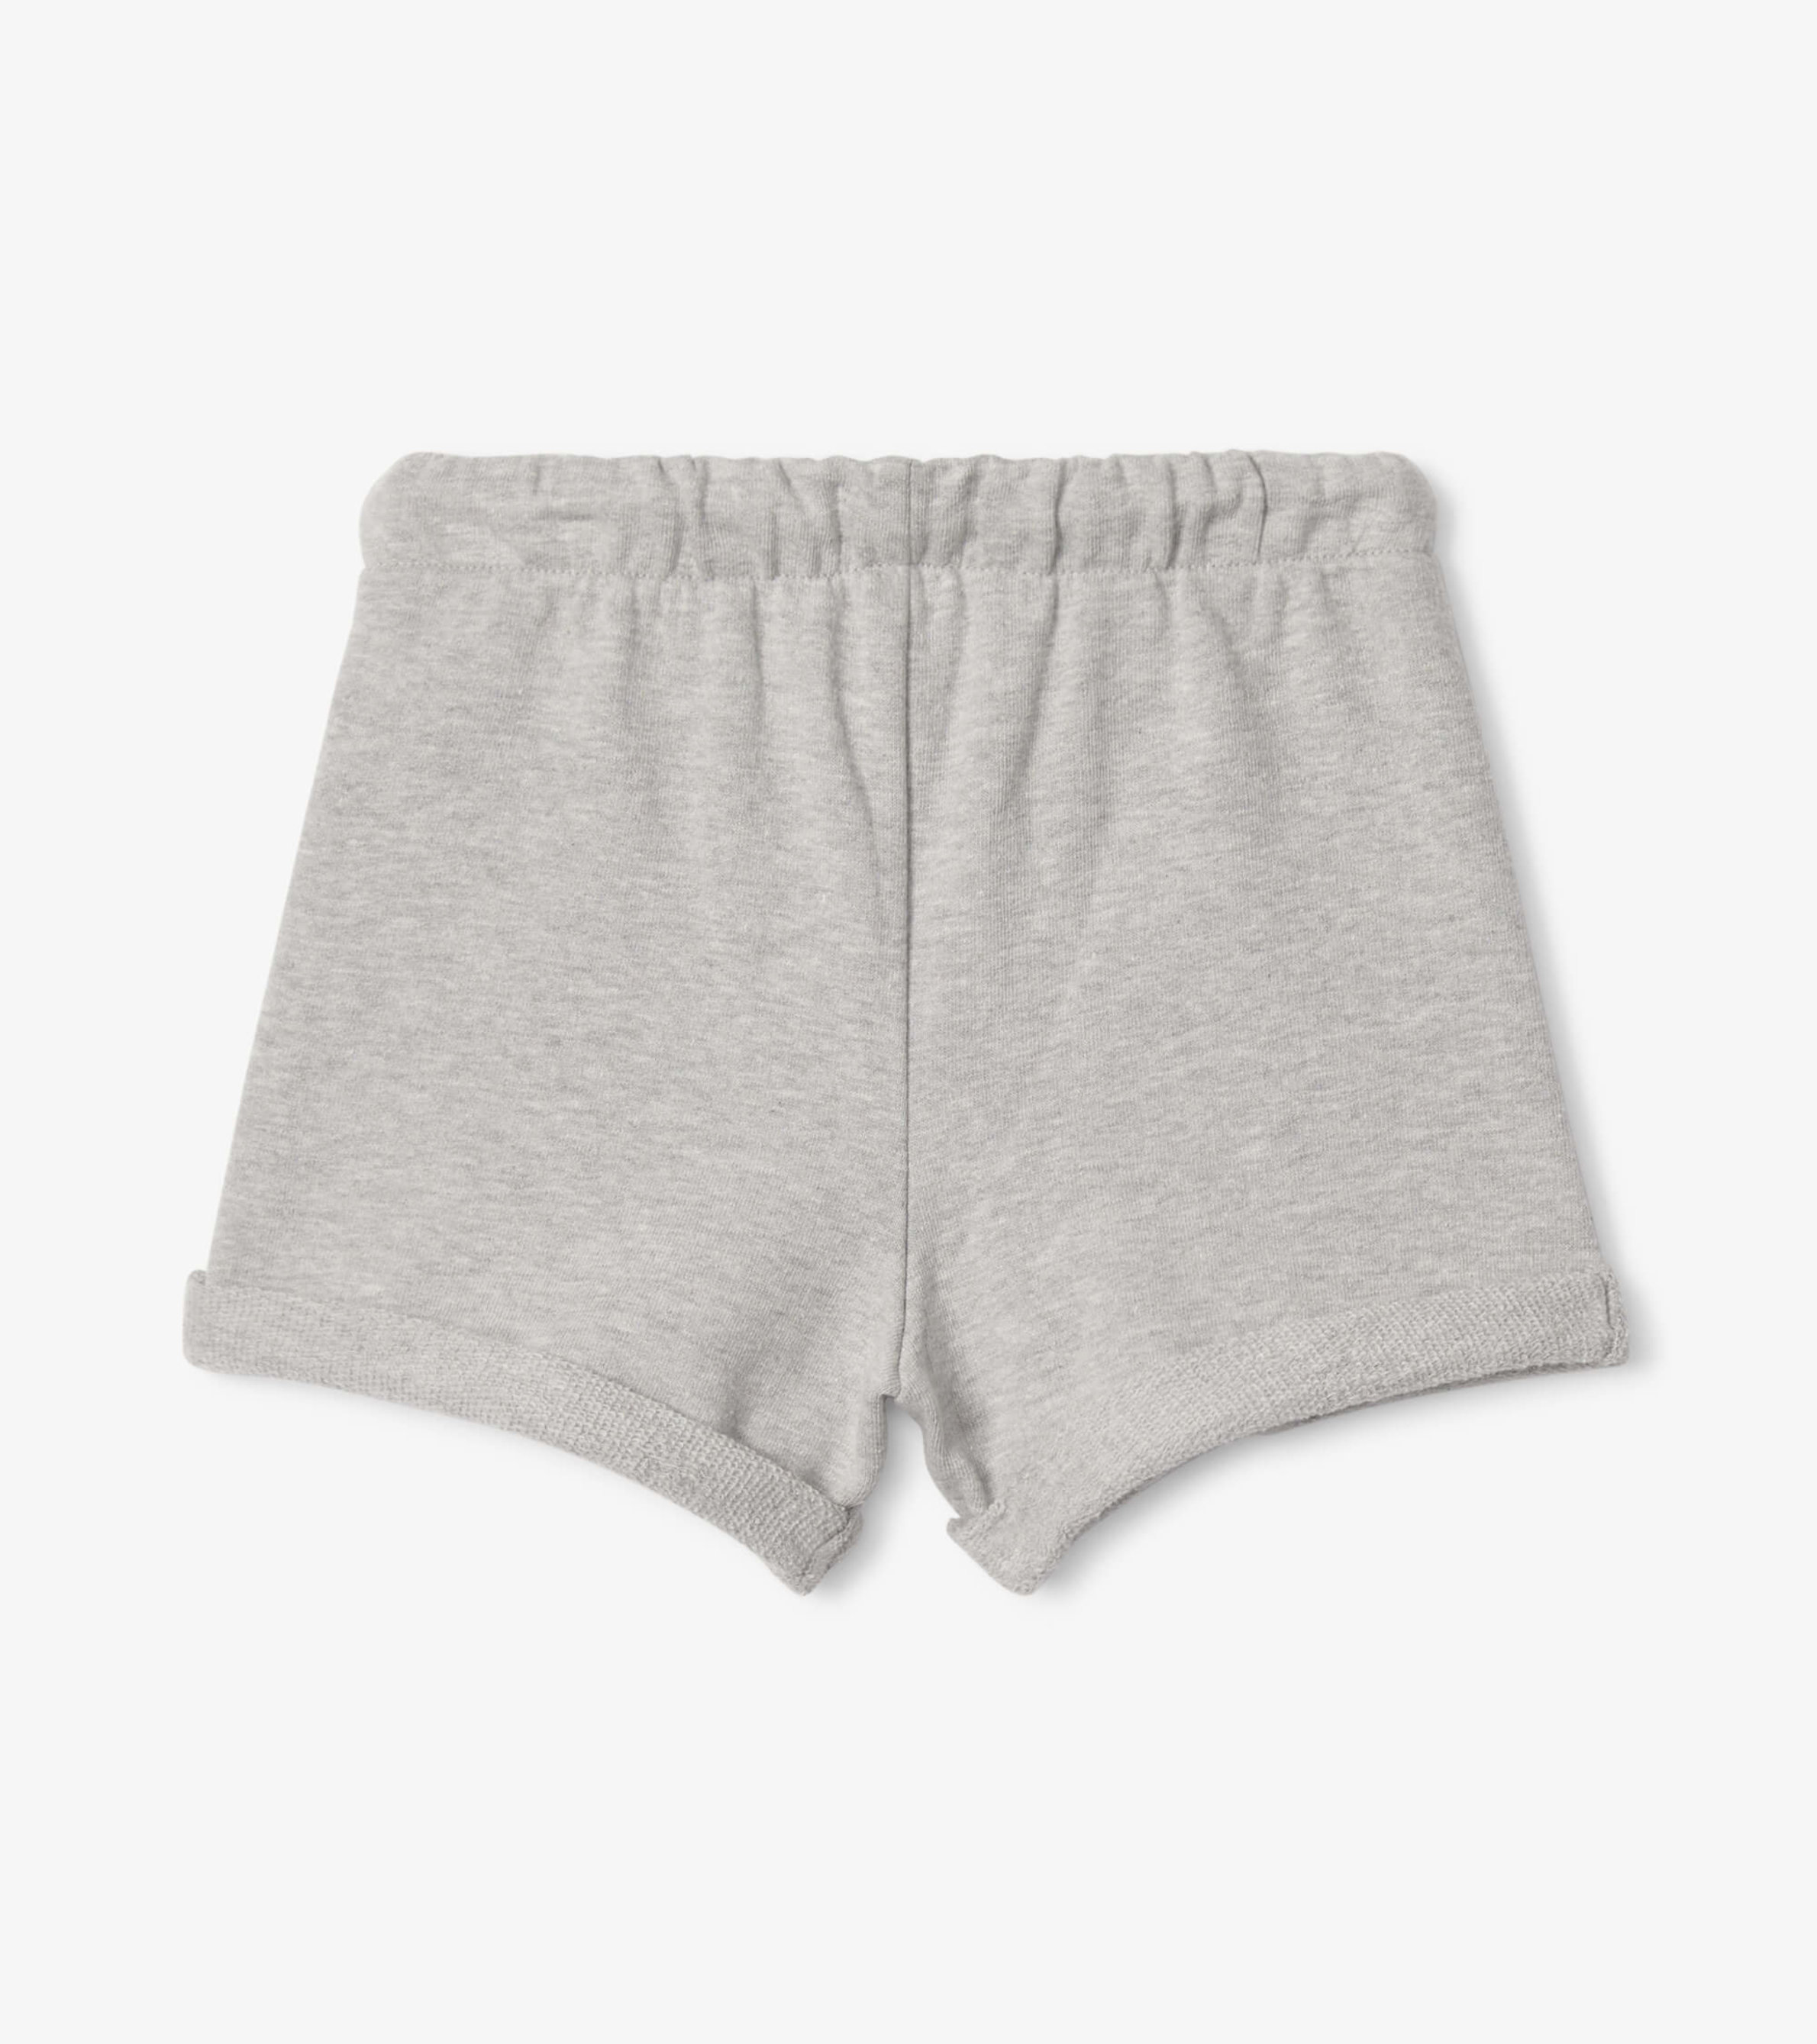 Athletic Grey Toddler Pull On Shorts - Hatley US